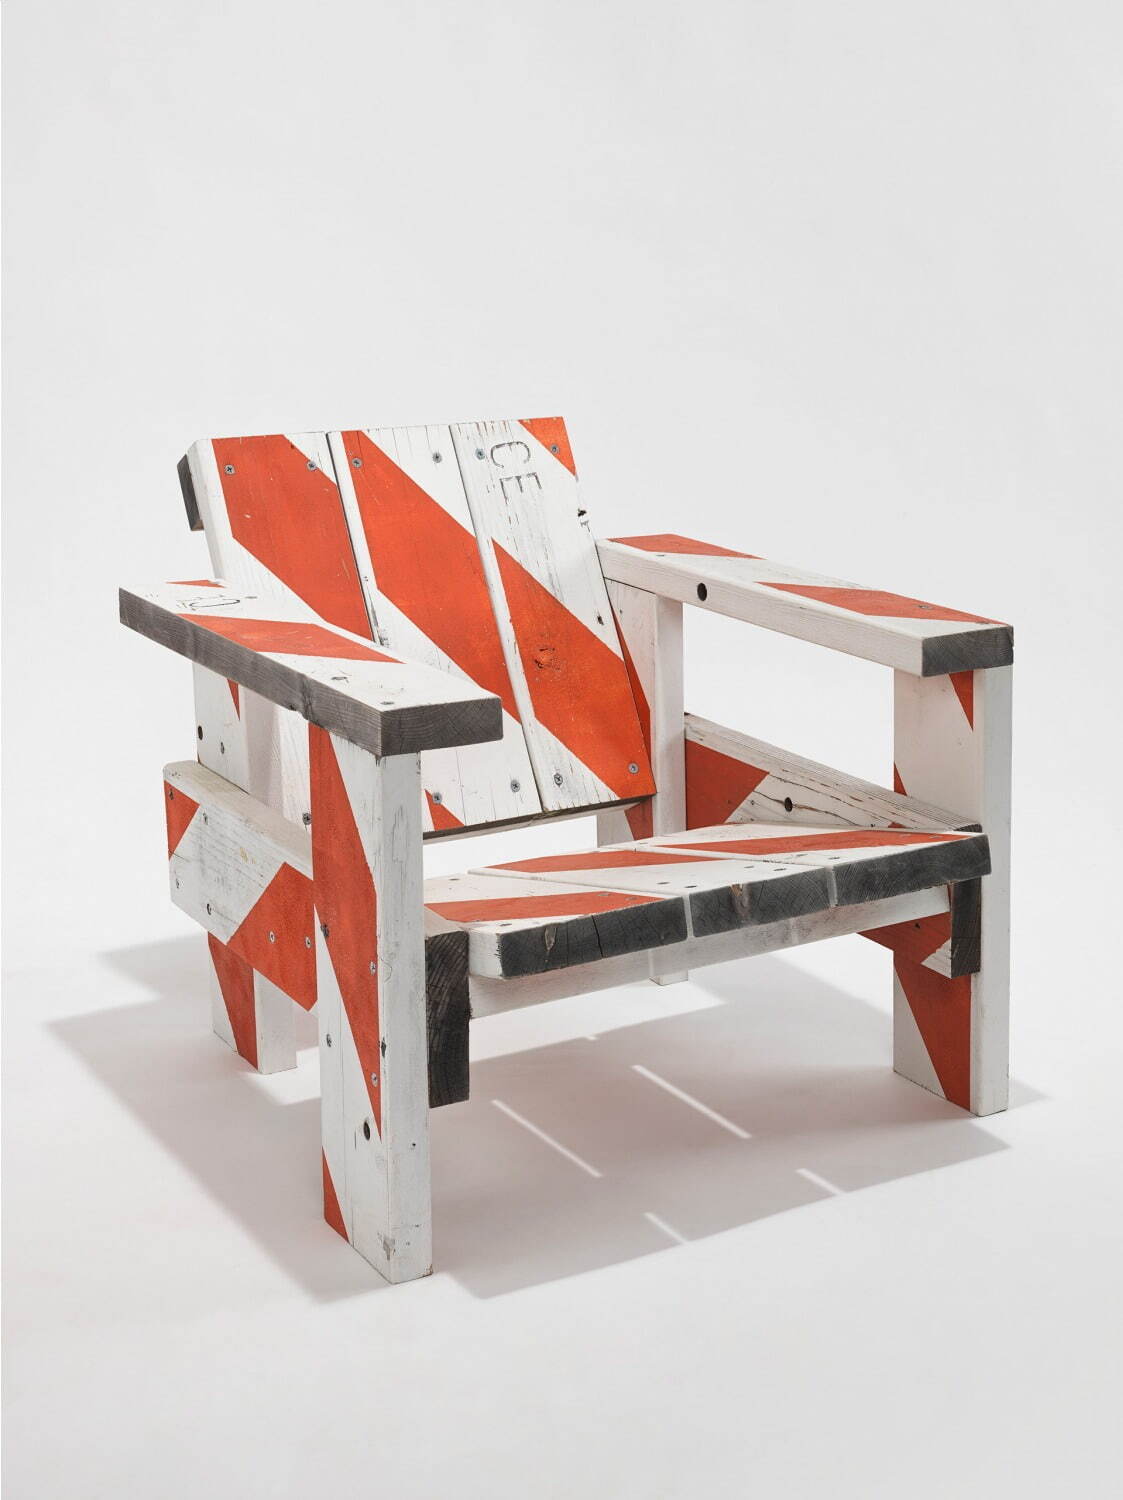 Crate Chair, 2018 61.9 x 67.9 x 79.4cm